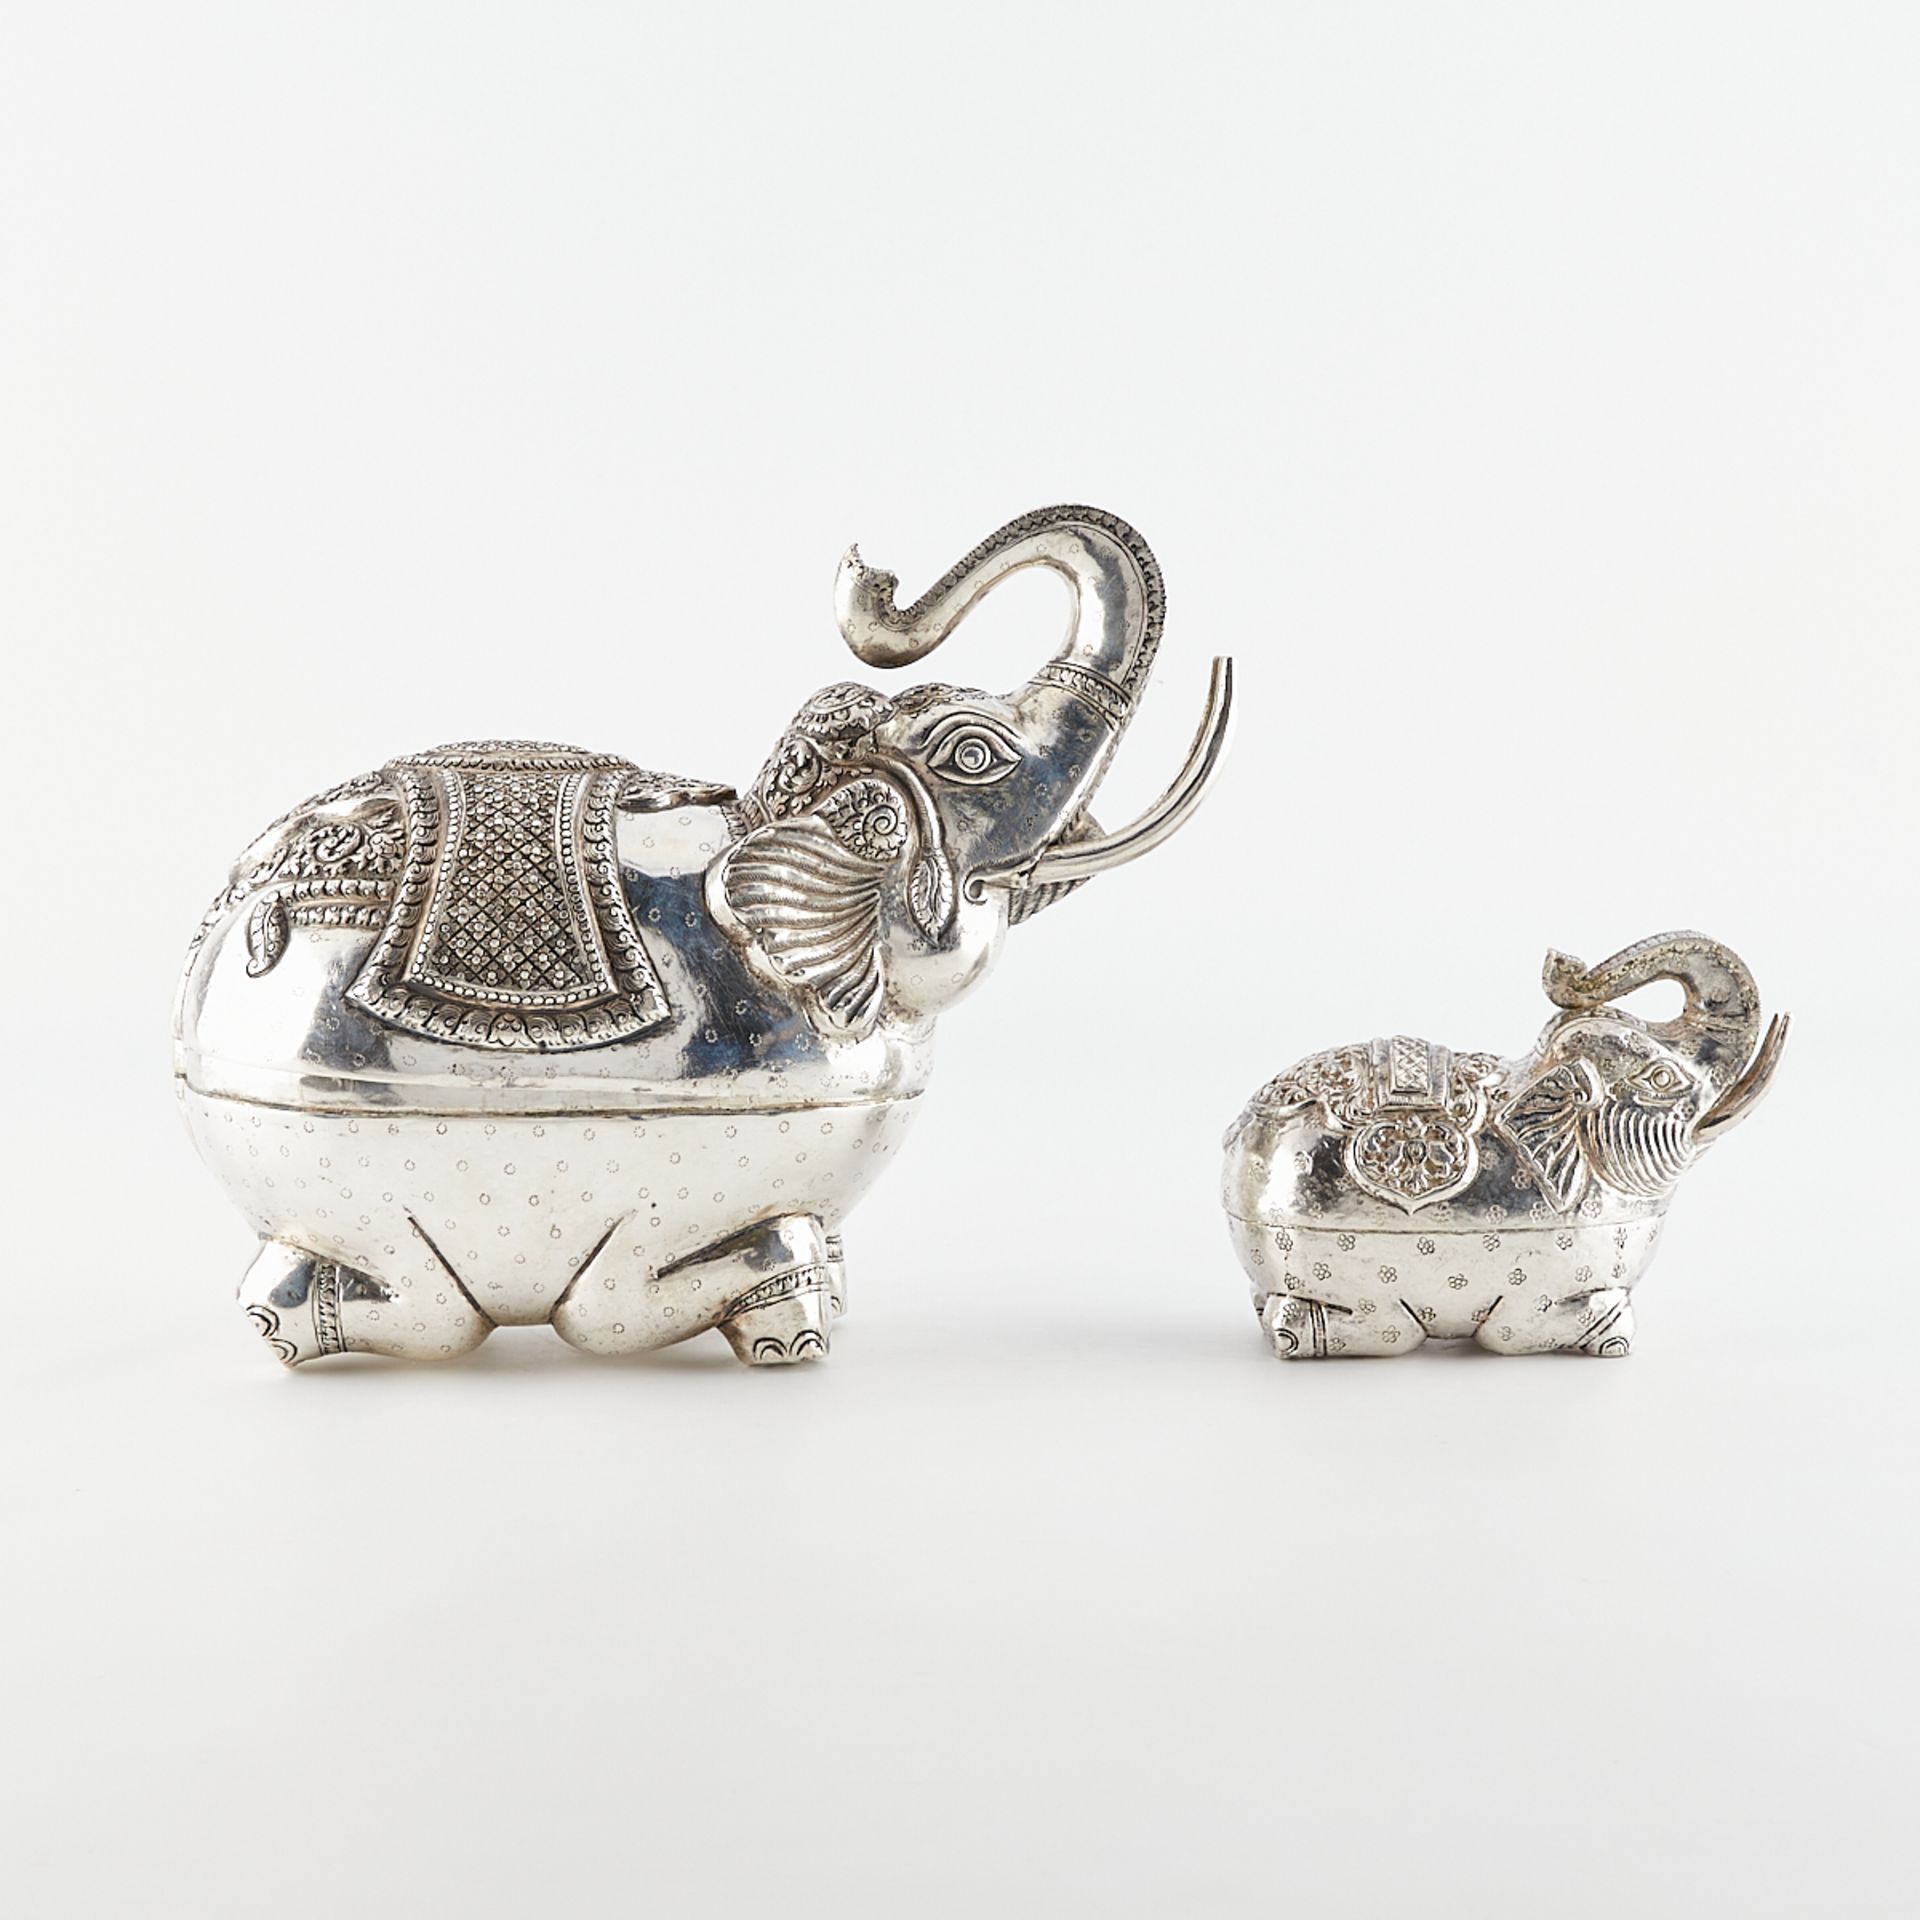 2 Cambodian Silver Elephant Betel Nut Boxes - Image 5 of 12